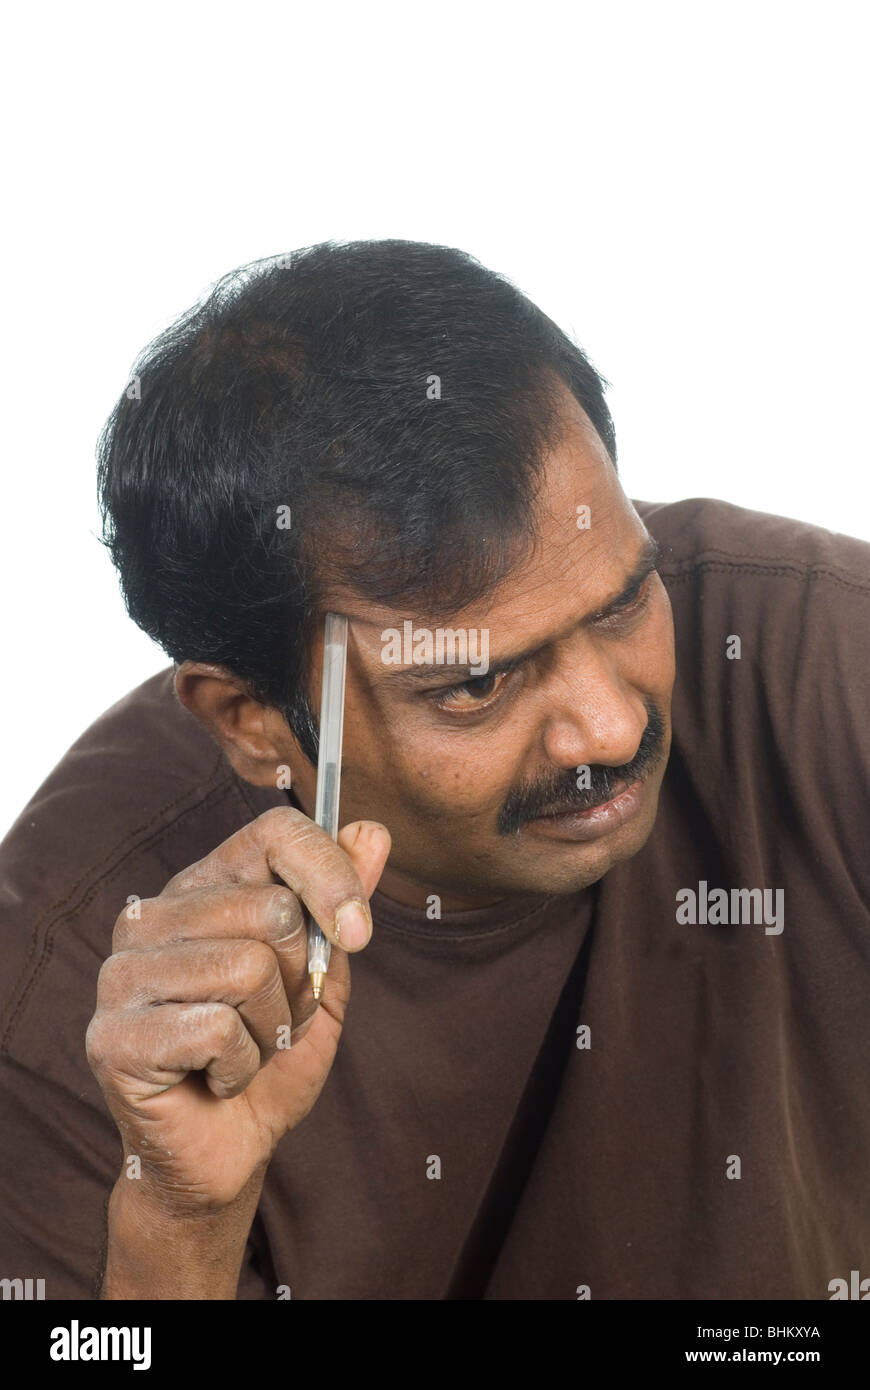 indian-man-thinking-while-holding-a-pen-against-a-white-background-BHKXYA.jpg